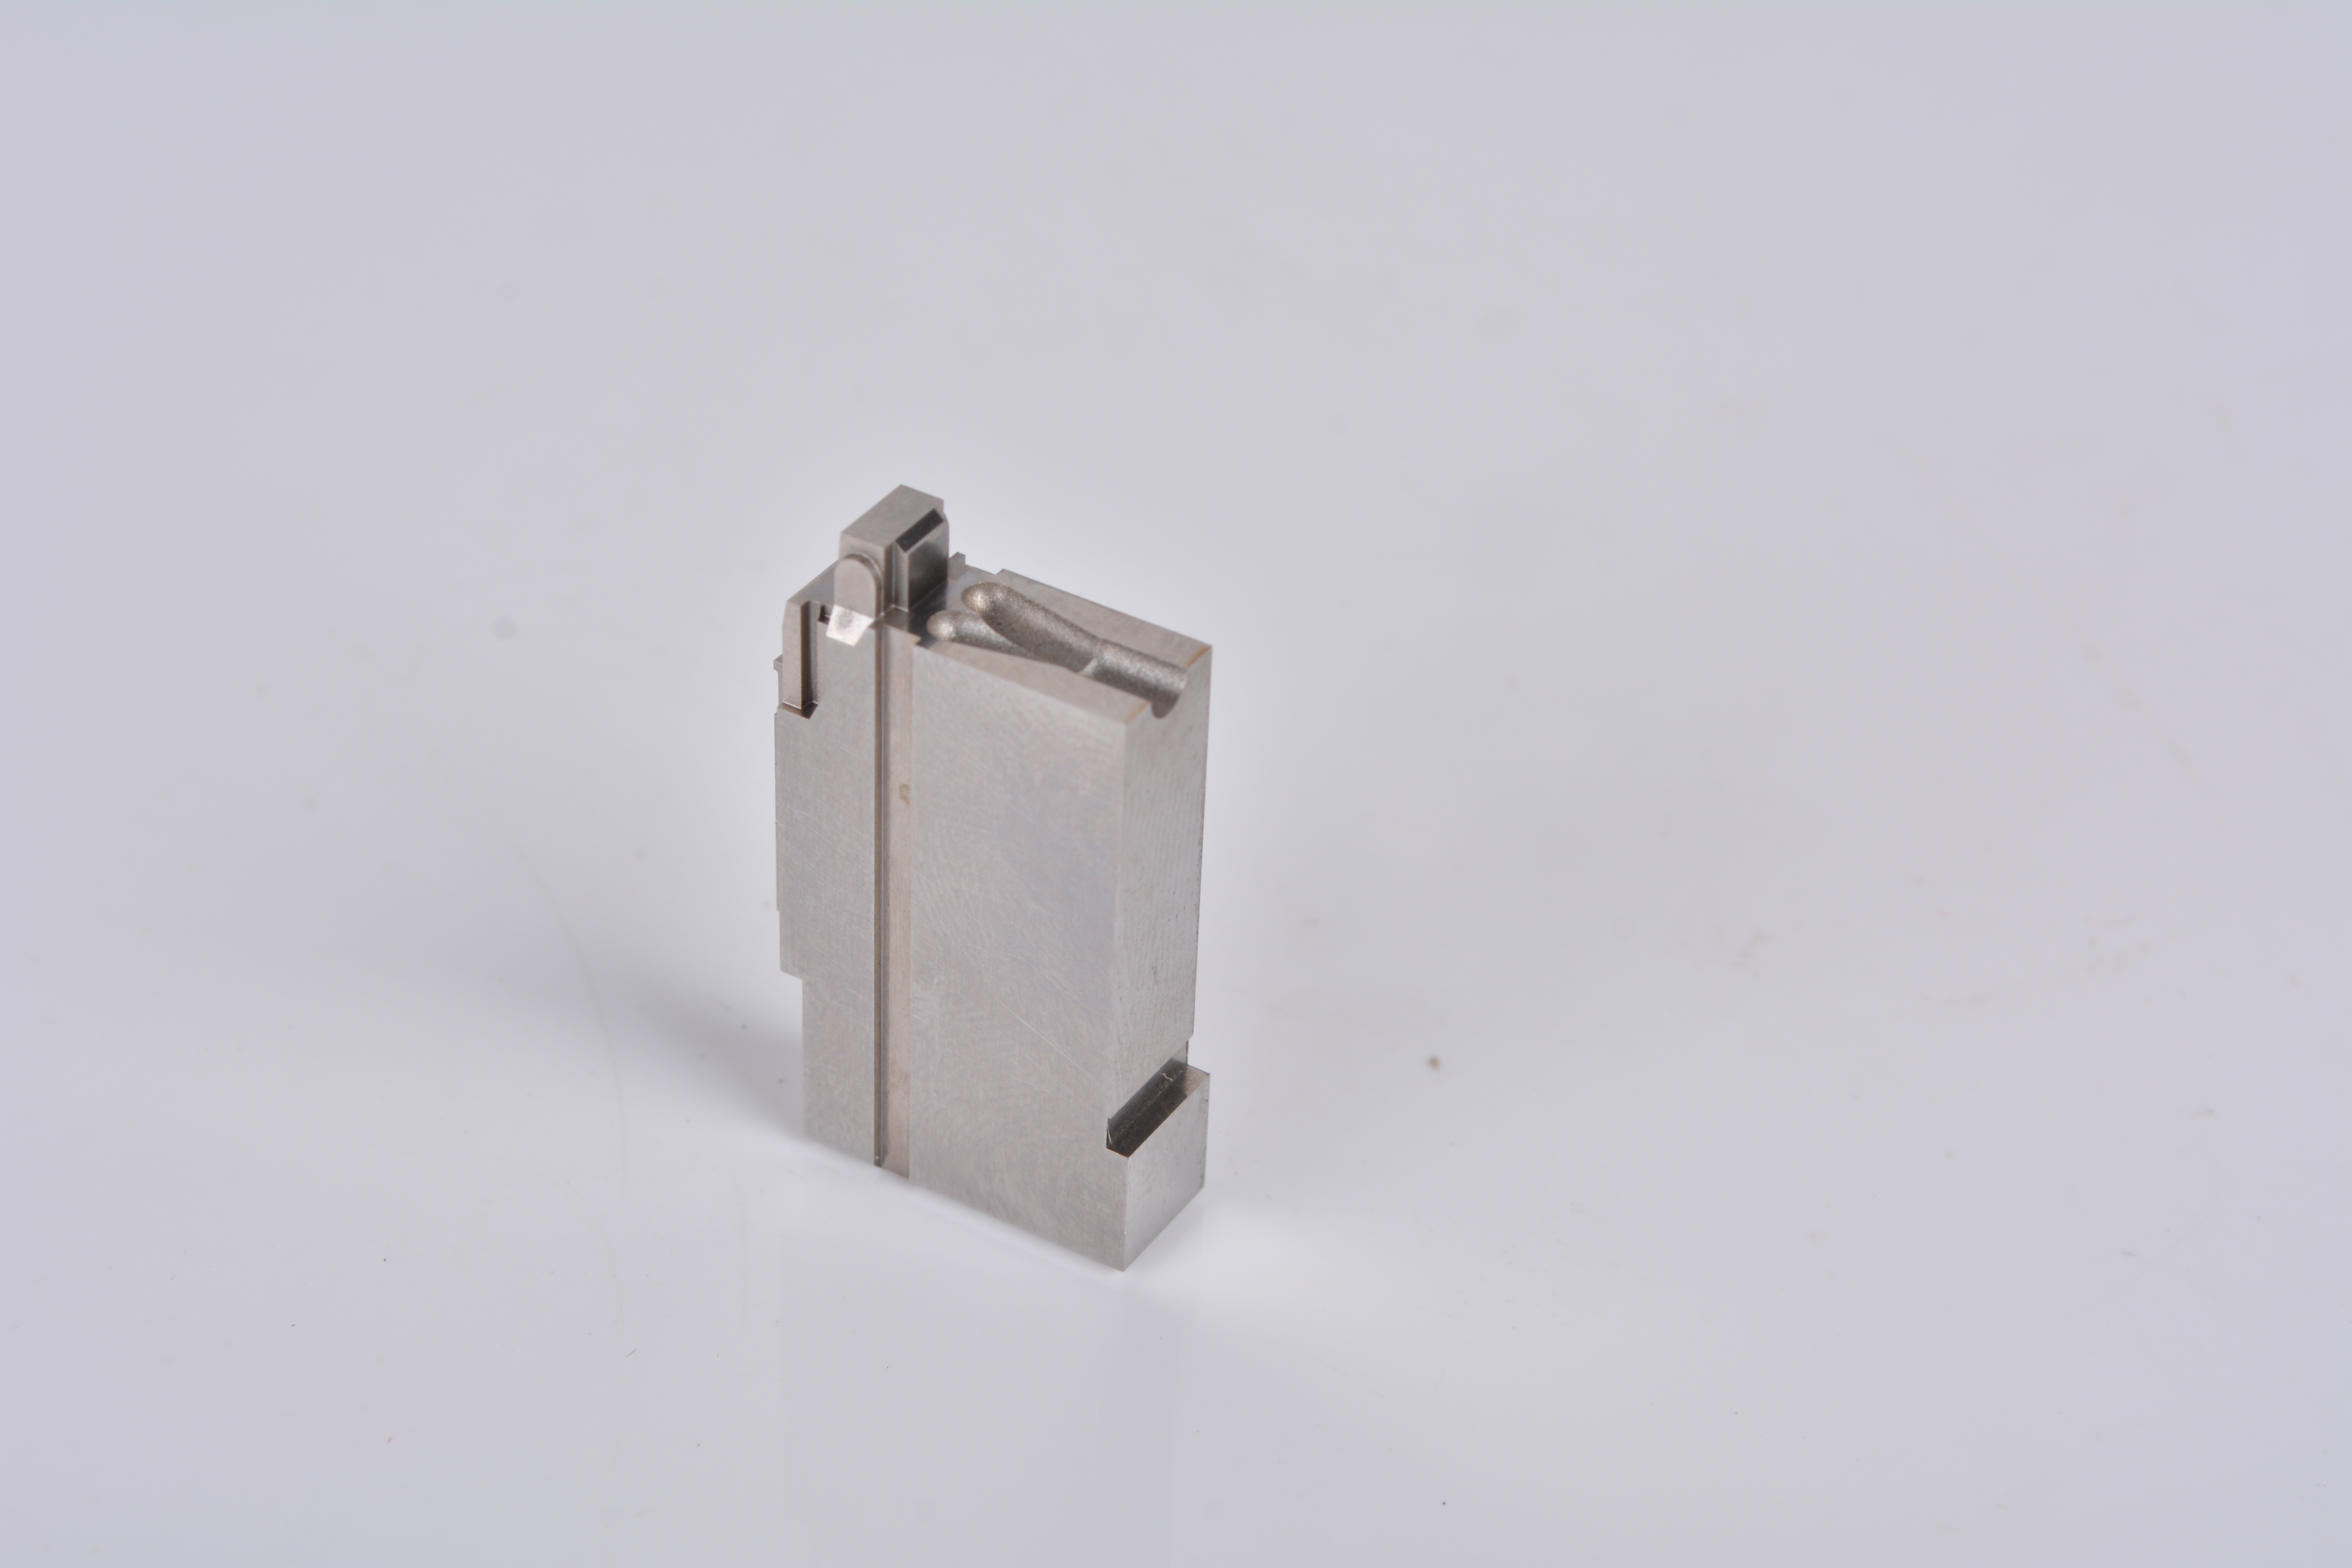 Mold Connector Manufacturer –  Auto connector mold manufacturer precision plug-in injection plastic plastic mold – SENDY